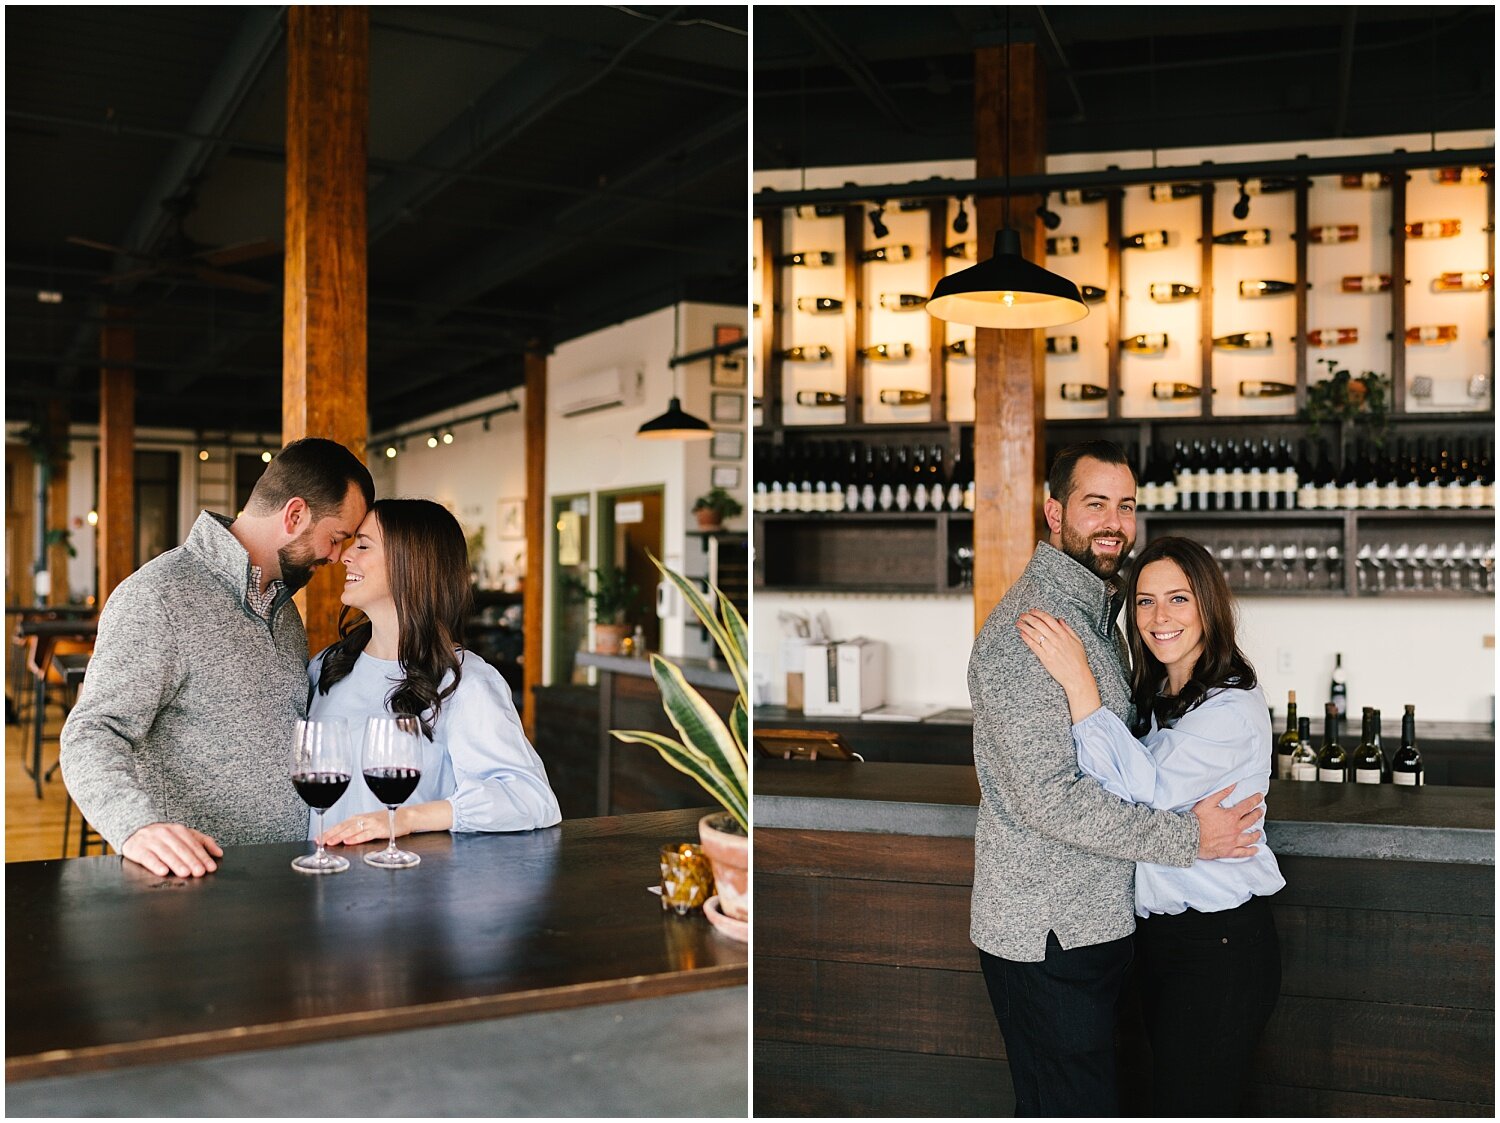 living+roots+wine+engagement+session+rochester+ny+wedding+photographer (5).jpg